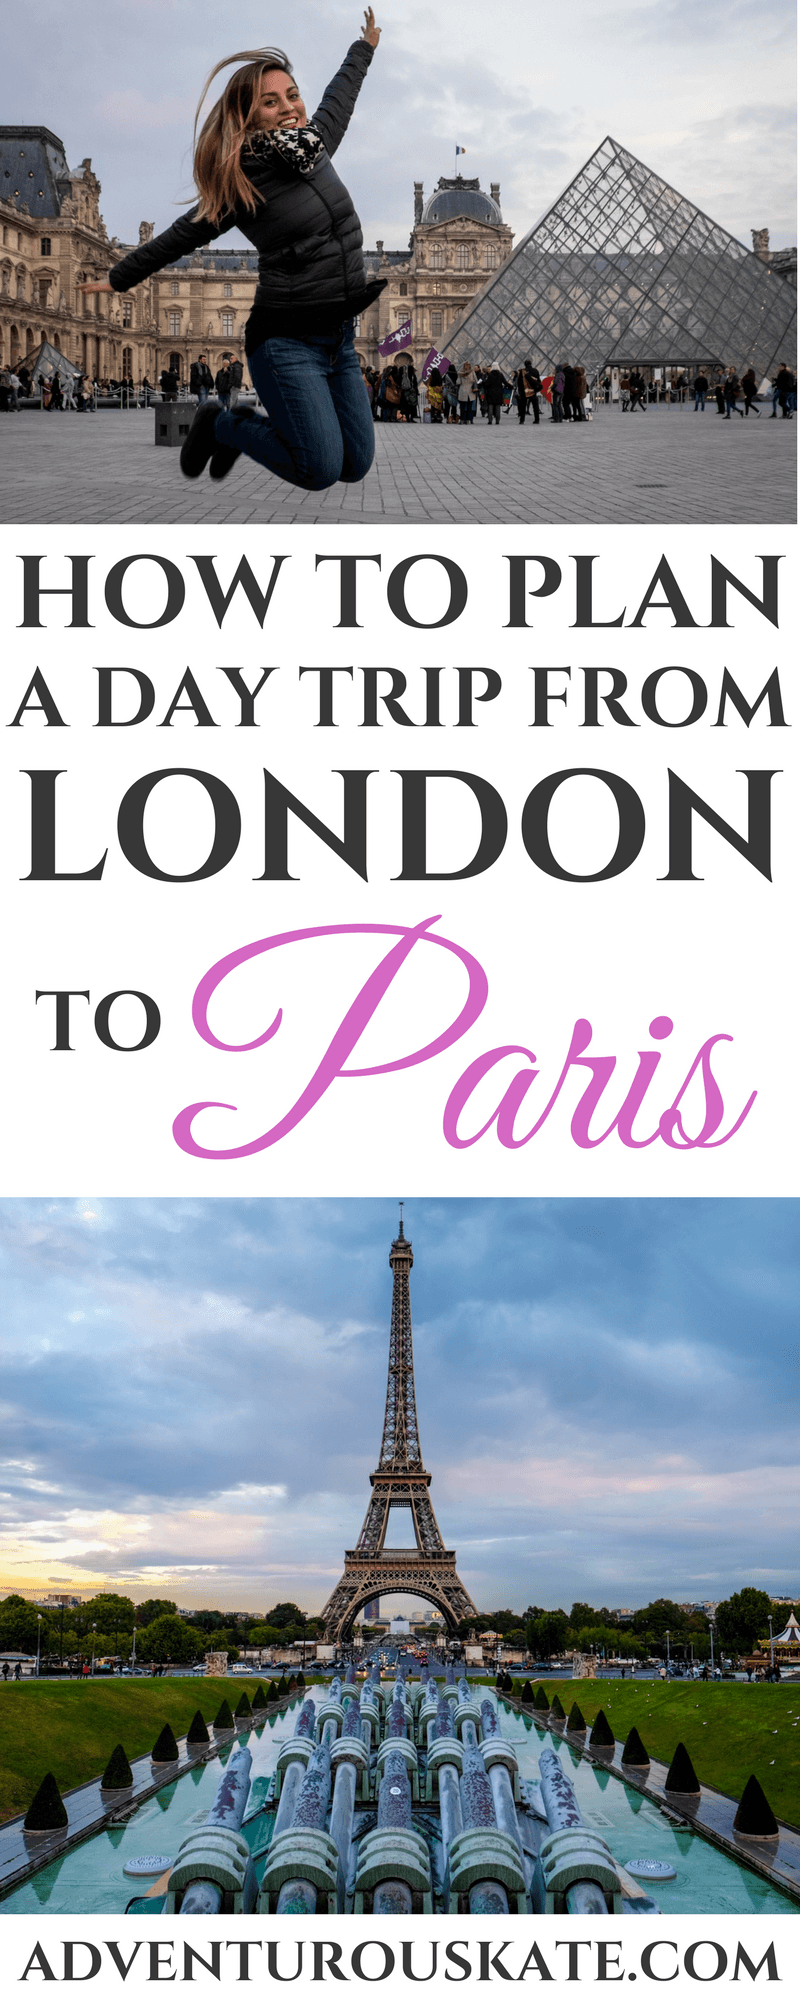 How to Plan a Day Trip from London to Paris by Train